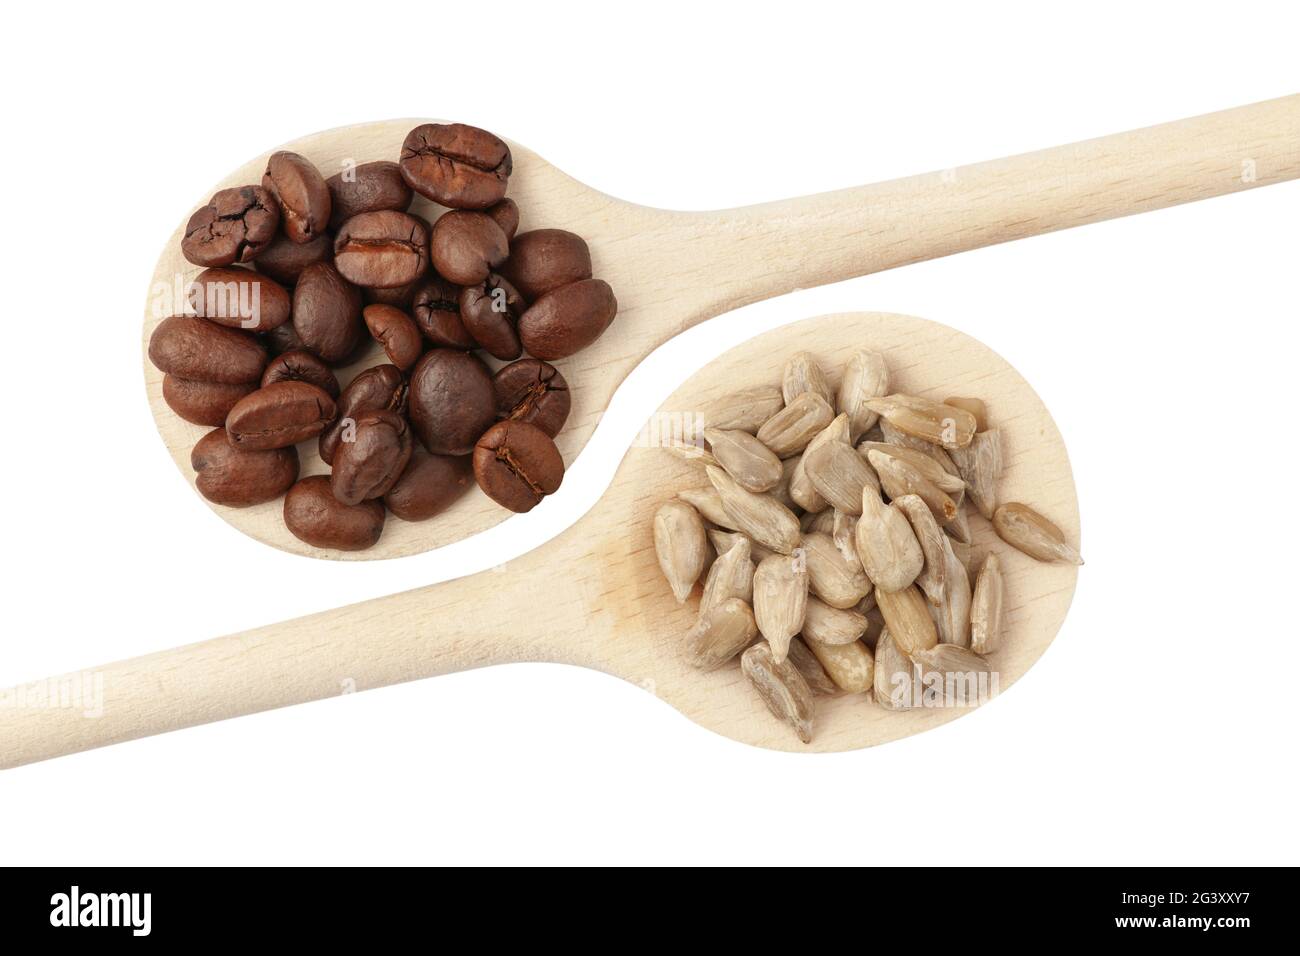 Coffee beans and sunflower seeds small Stock Photo